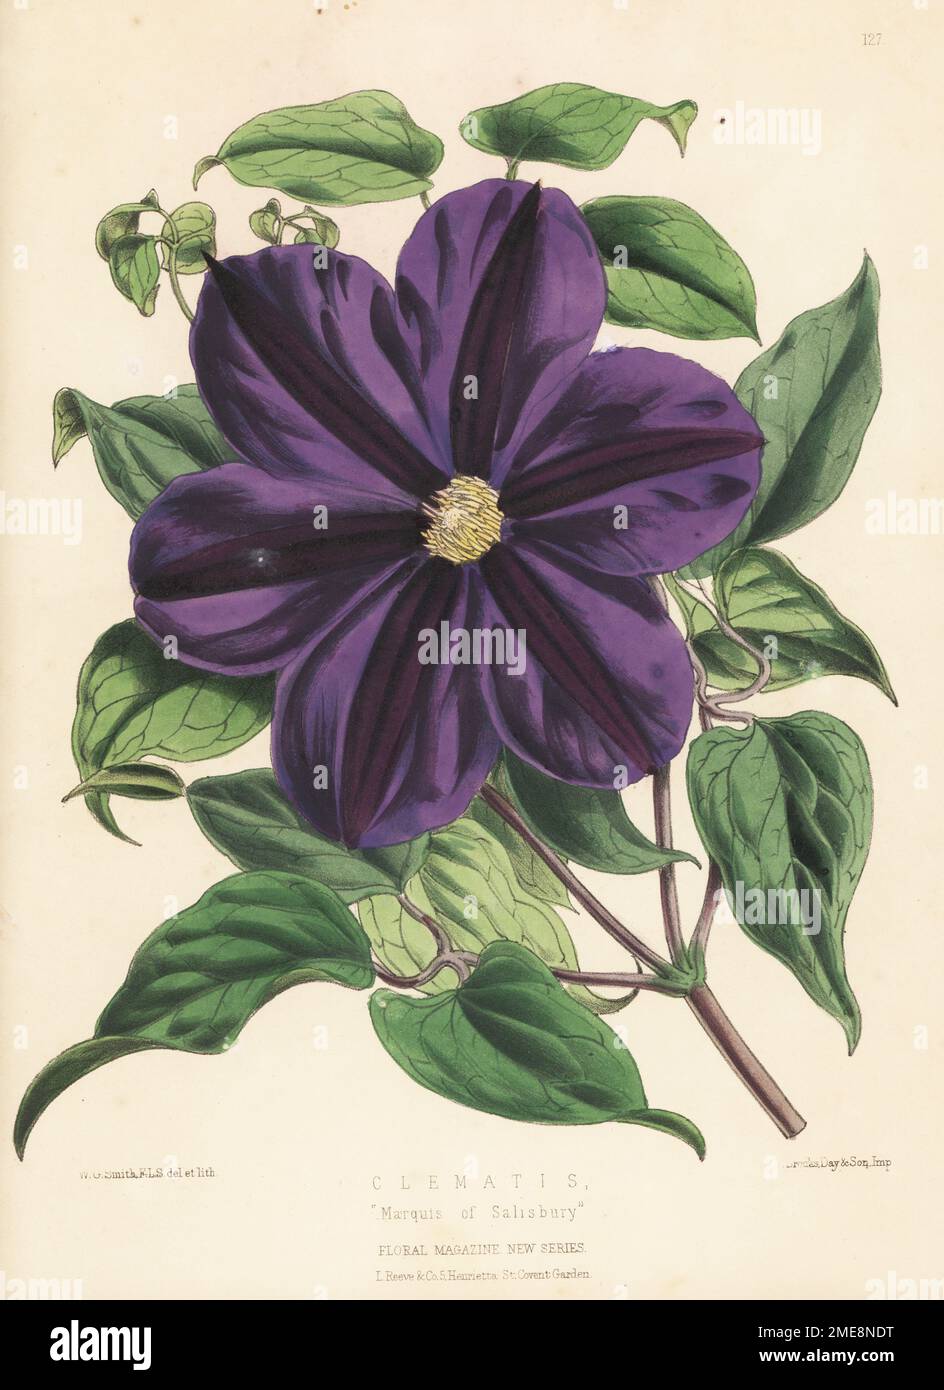 Clematis cultivar, Marquis of Salisbury. Large blue-flowered prize-winning hybrid at the Royal Horticultural Society show in April 1873. Handcolored botanical illustration drawn and lithographed by Worthington George Smith from Henry Honywood Dombrain's Floral Magazine, New Series, Volume 3, L. Reeve, London, 1874. Lithograph printed by Vincent Brooks, Day & Son. Stock Photo